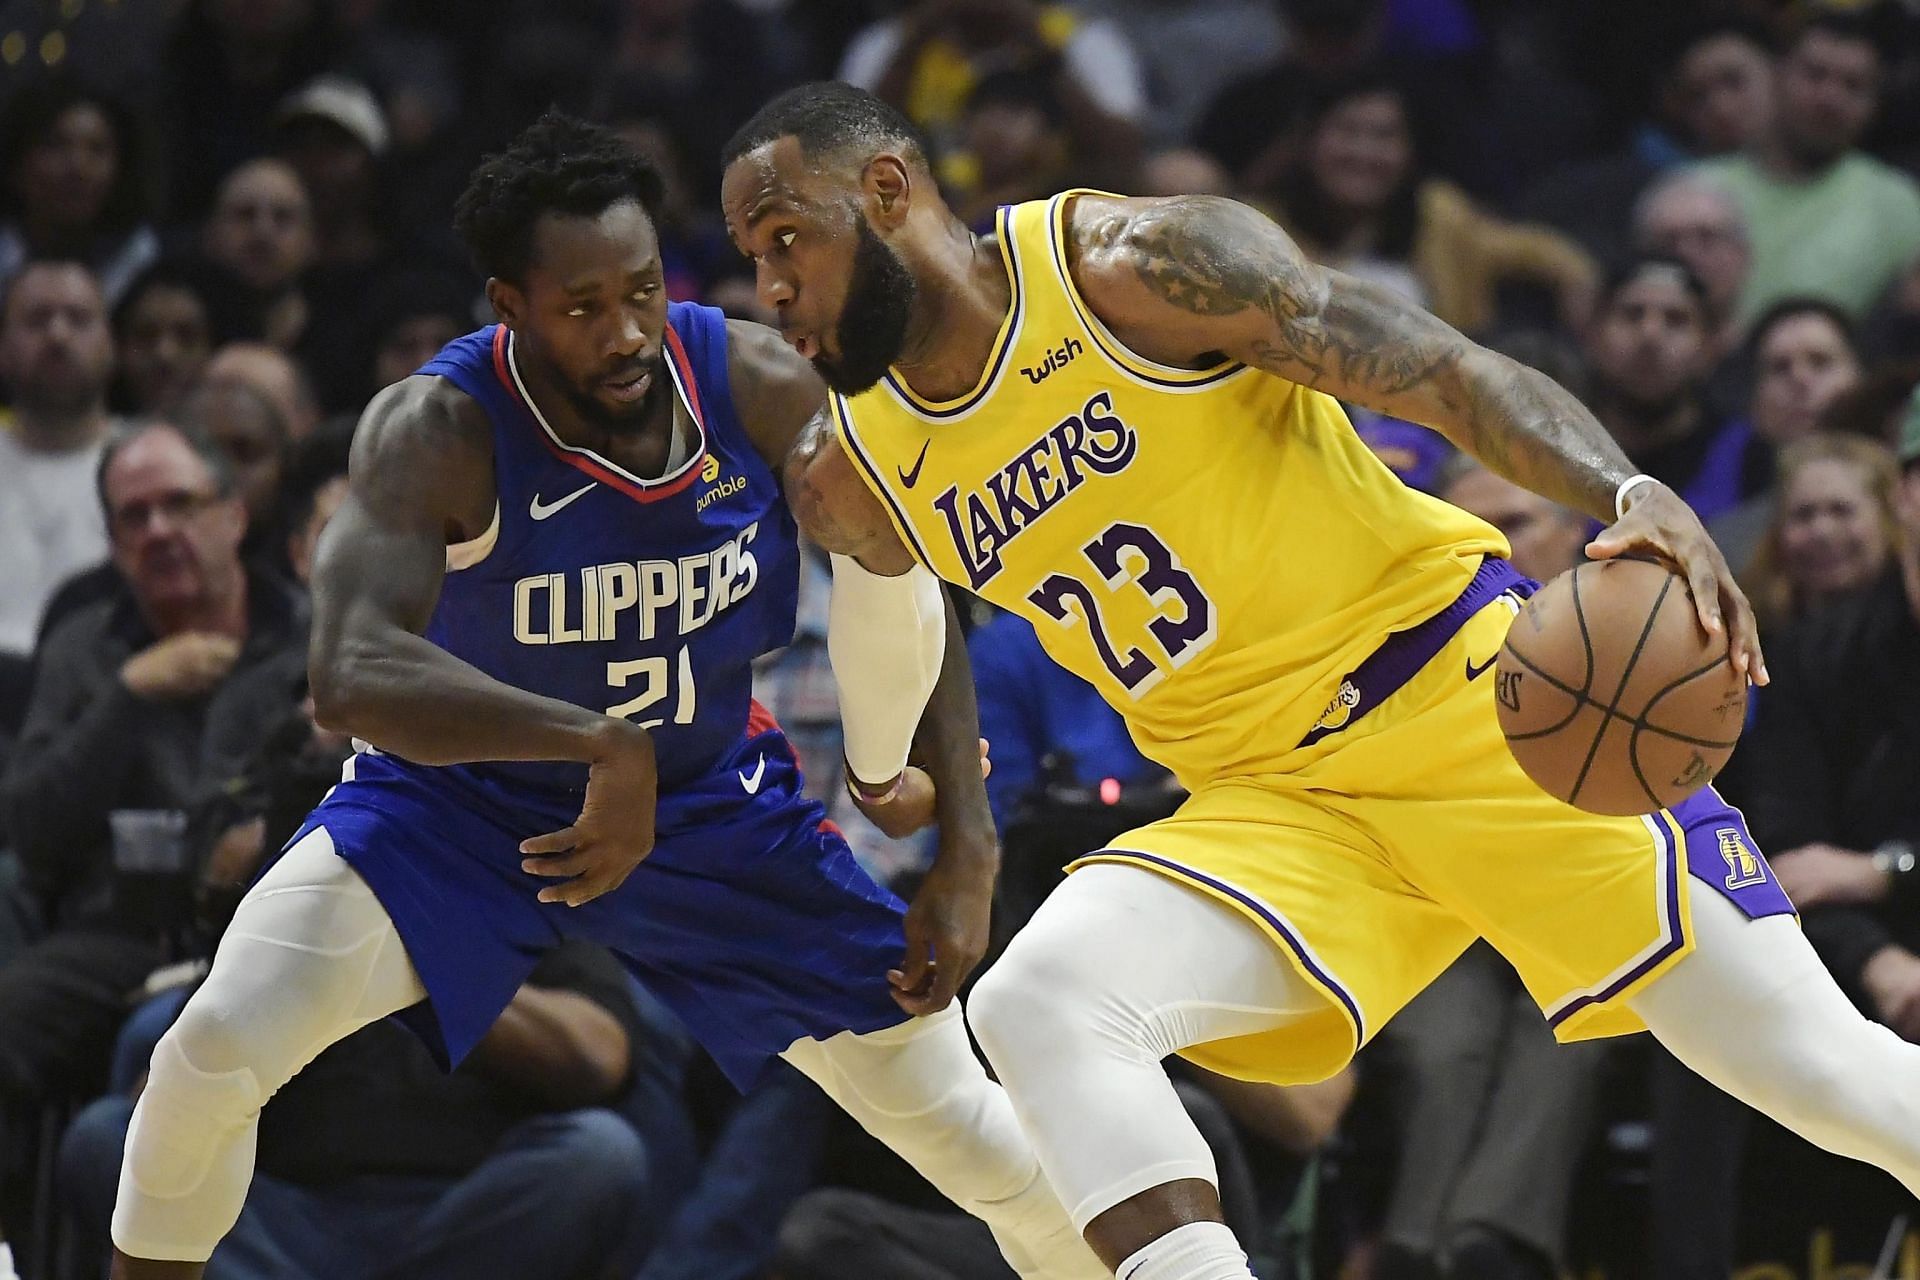 Patrick Beverley and LeBron James in action during LA Lakers versus LA Clippers game. [Source LA Times]